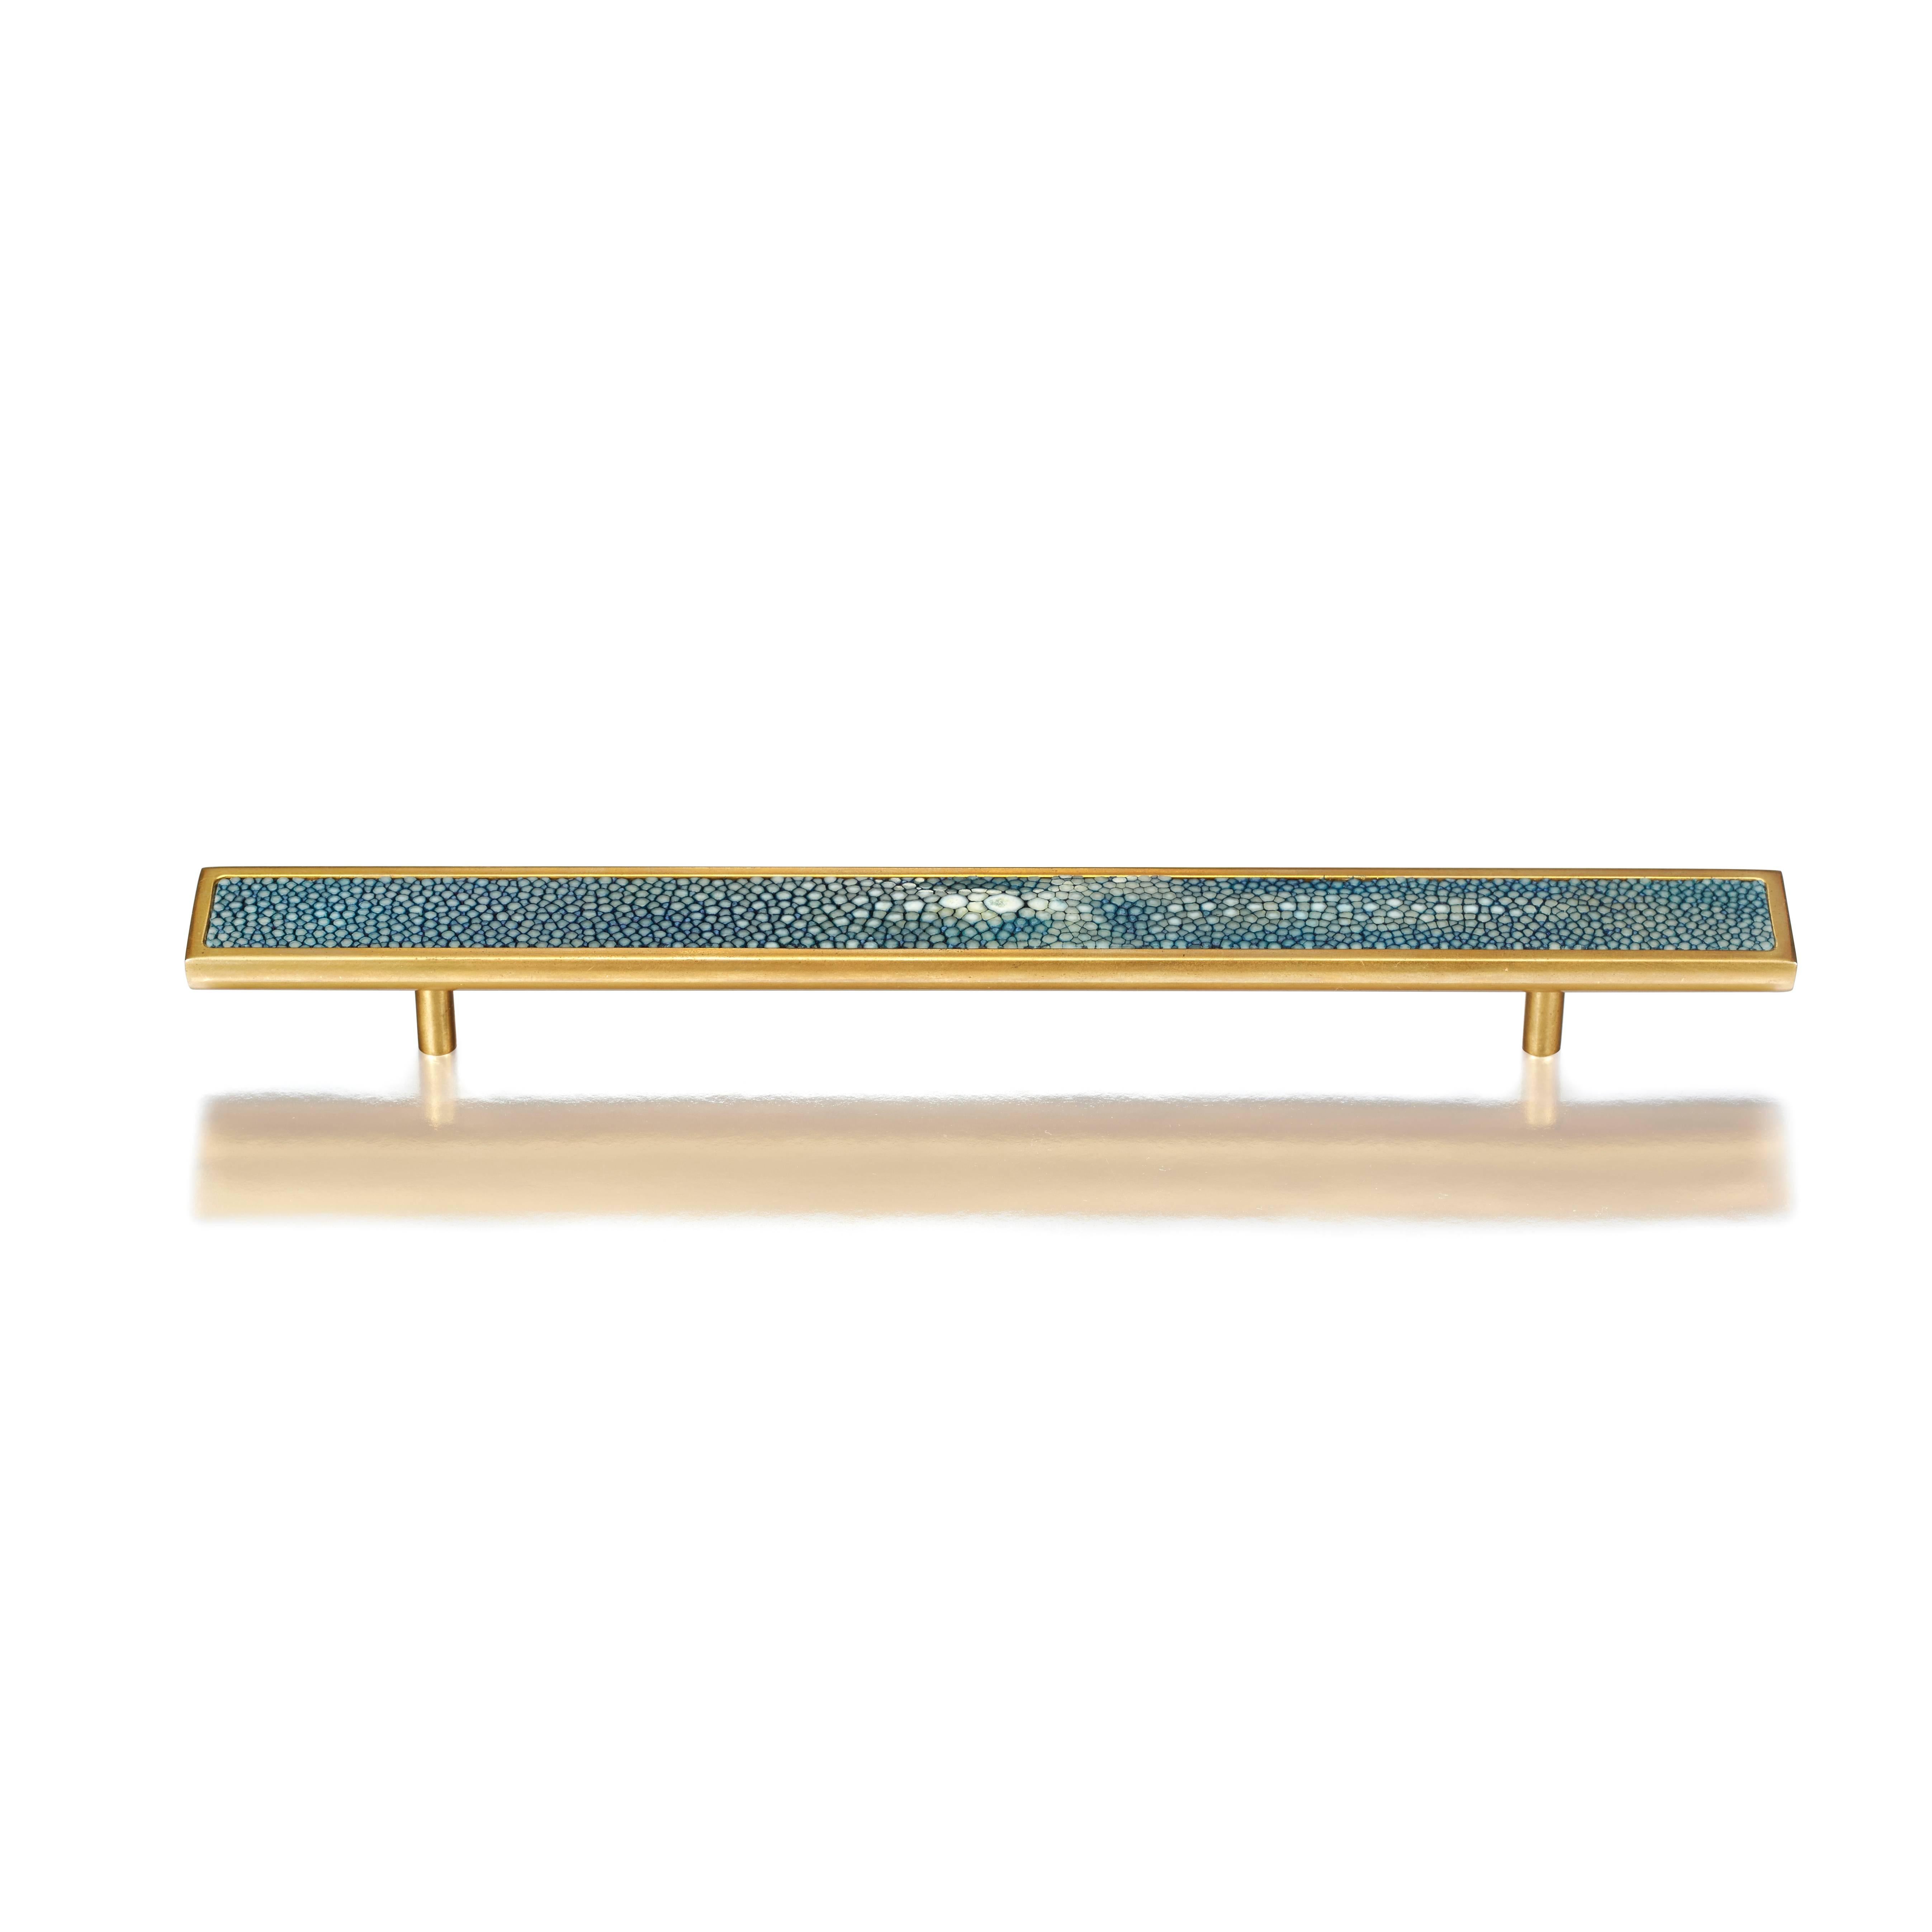 Flat faced D, polished brass cabinet pull with hand-dyed shagreen inlay.